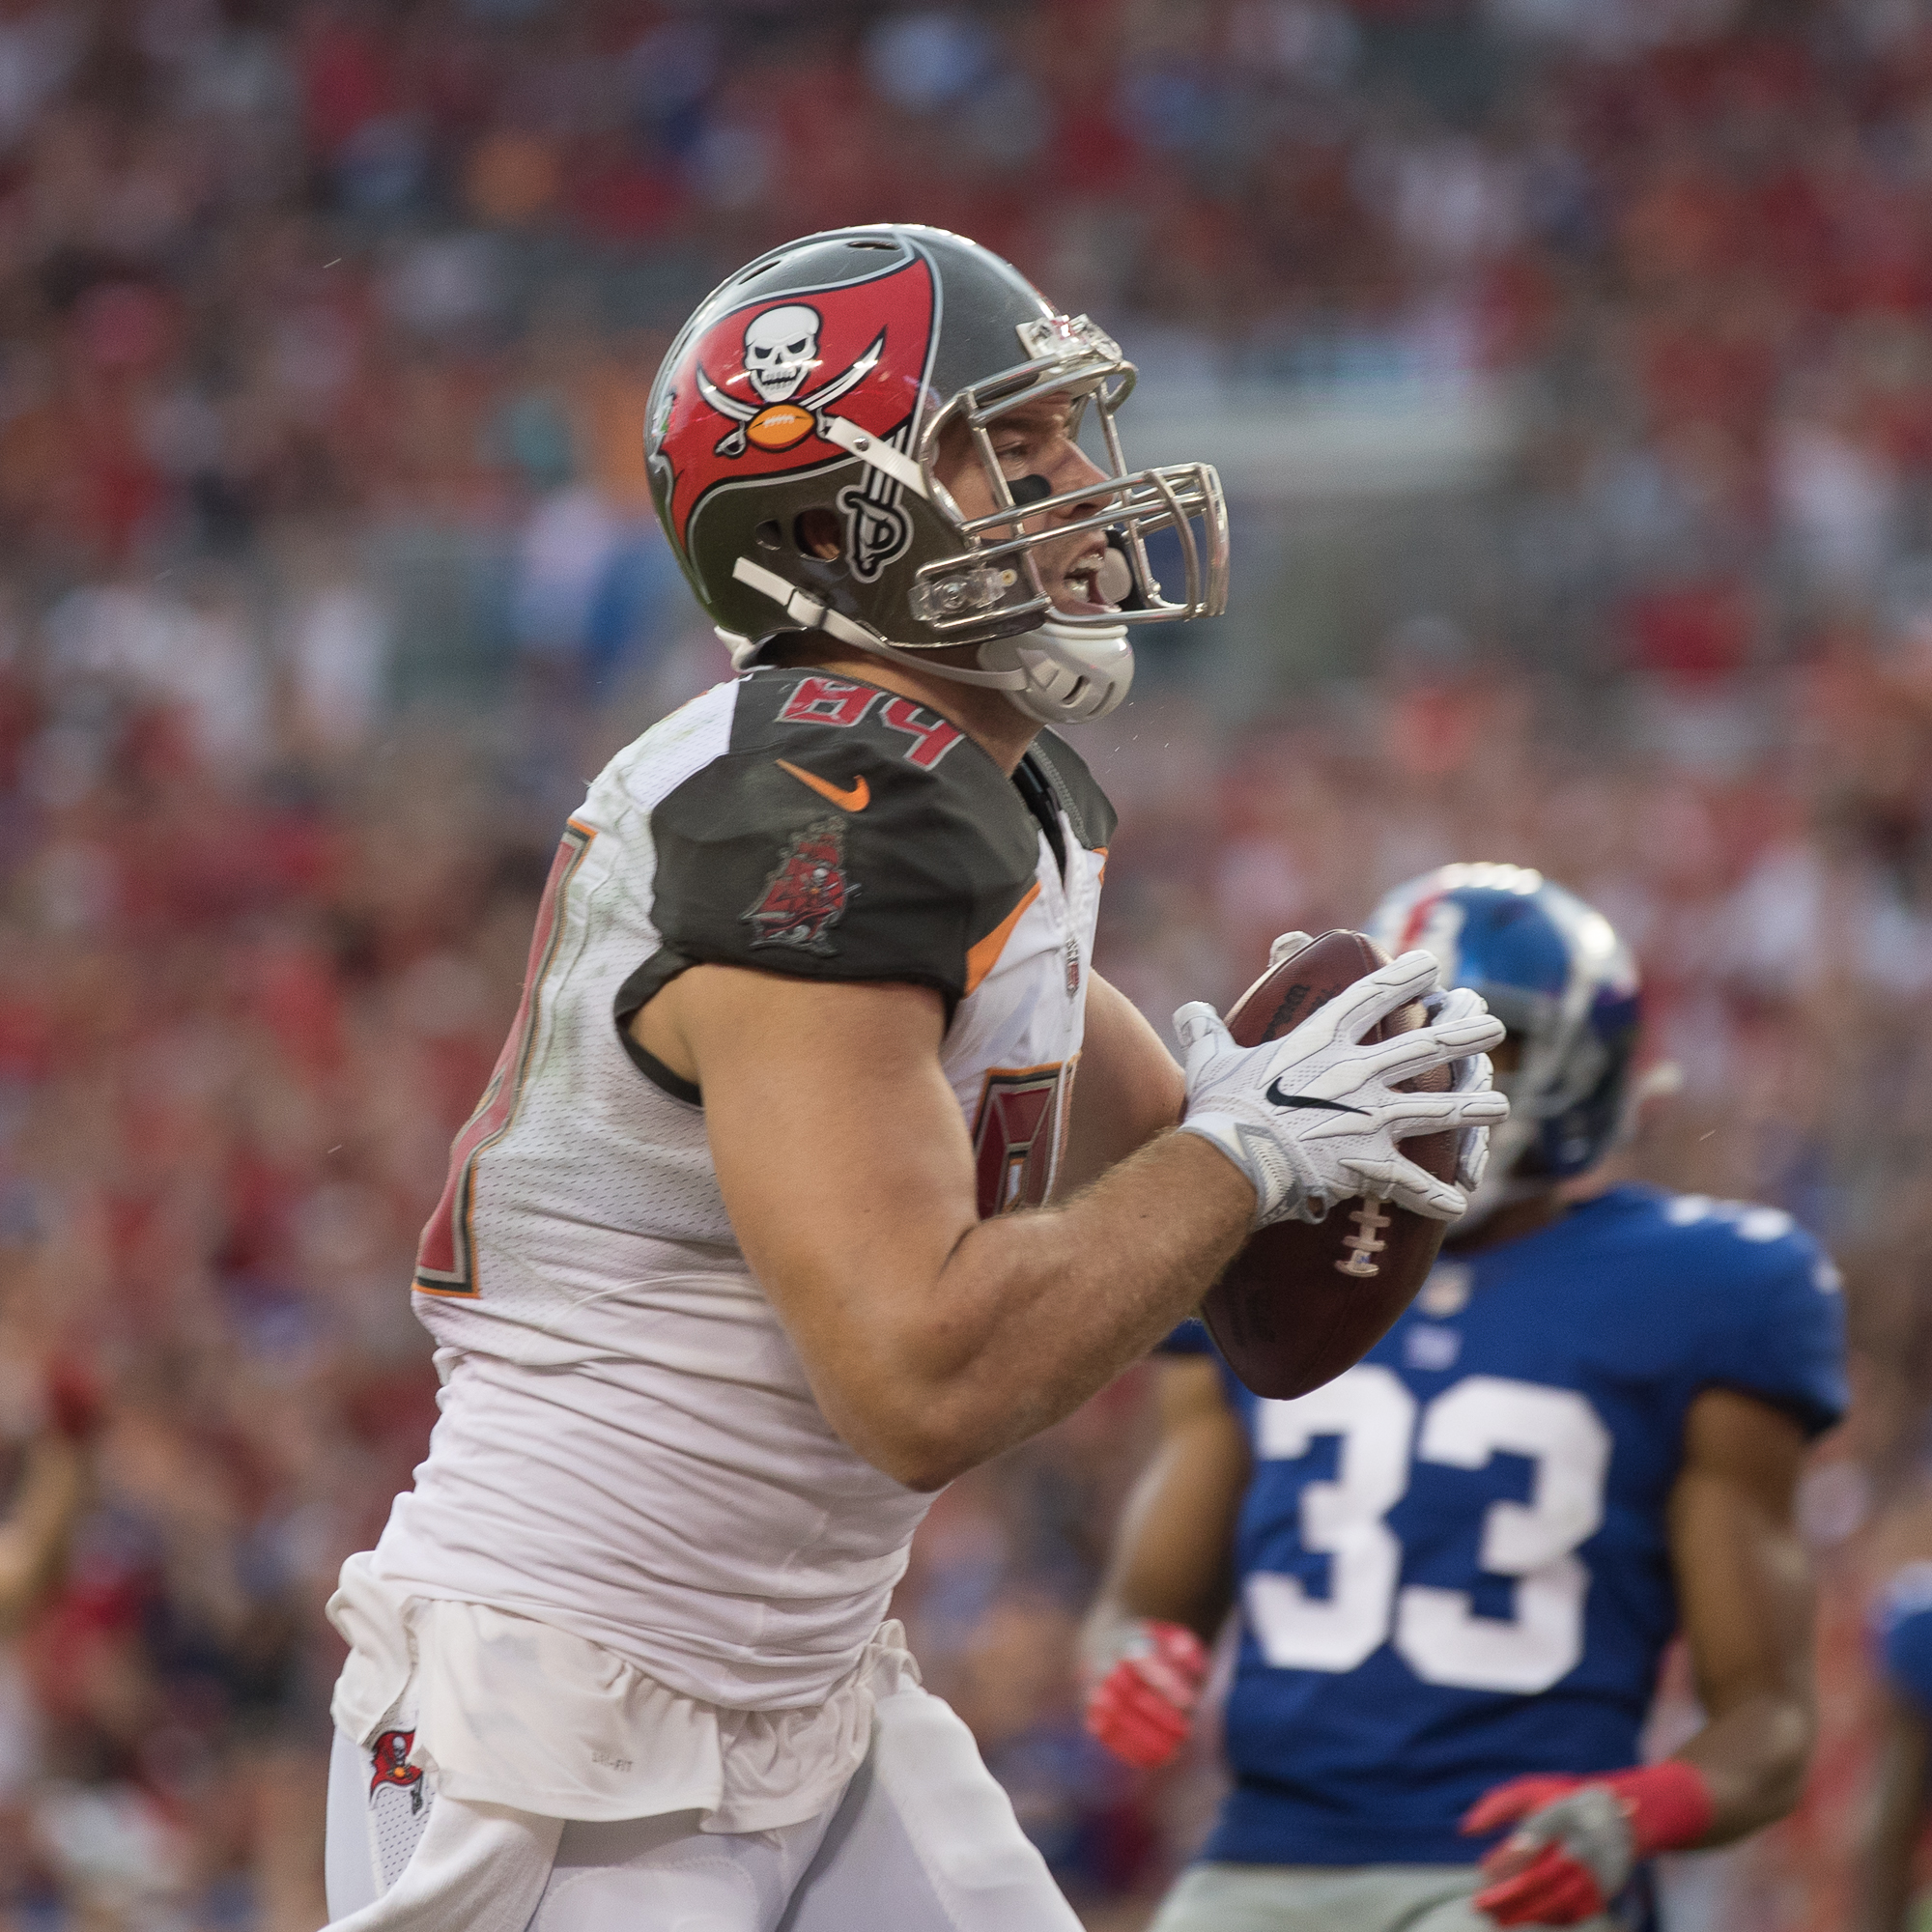 Cameron Brate catches the ball for a touchdown./STEVEN MUNCIE